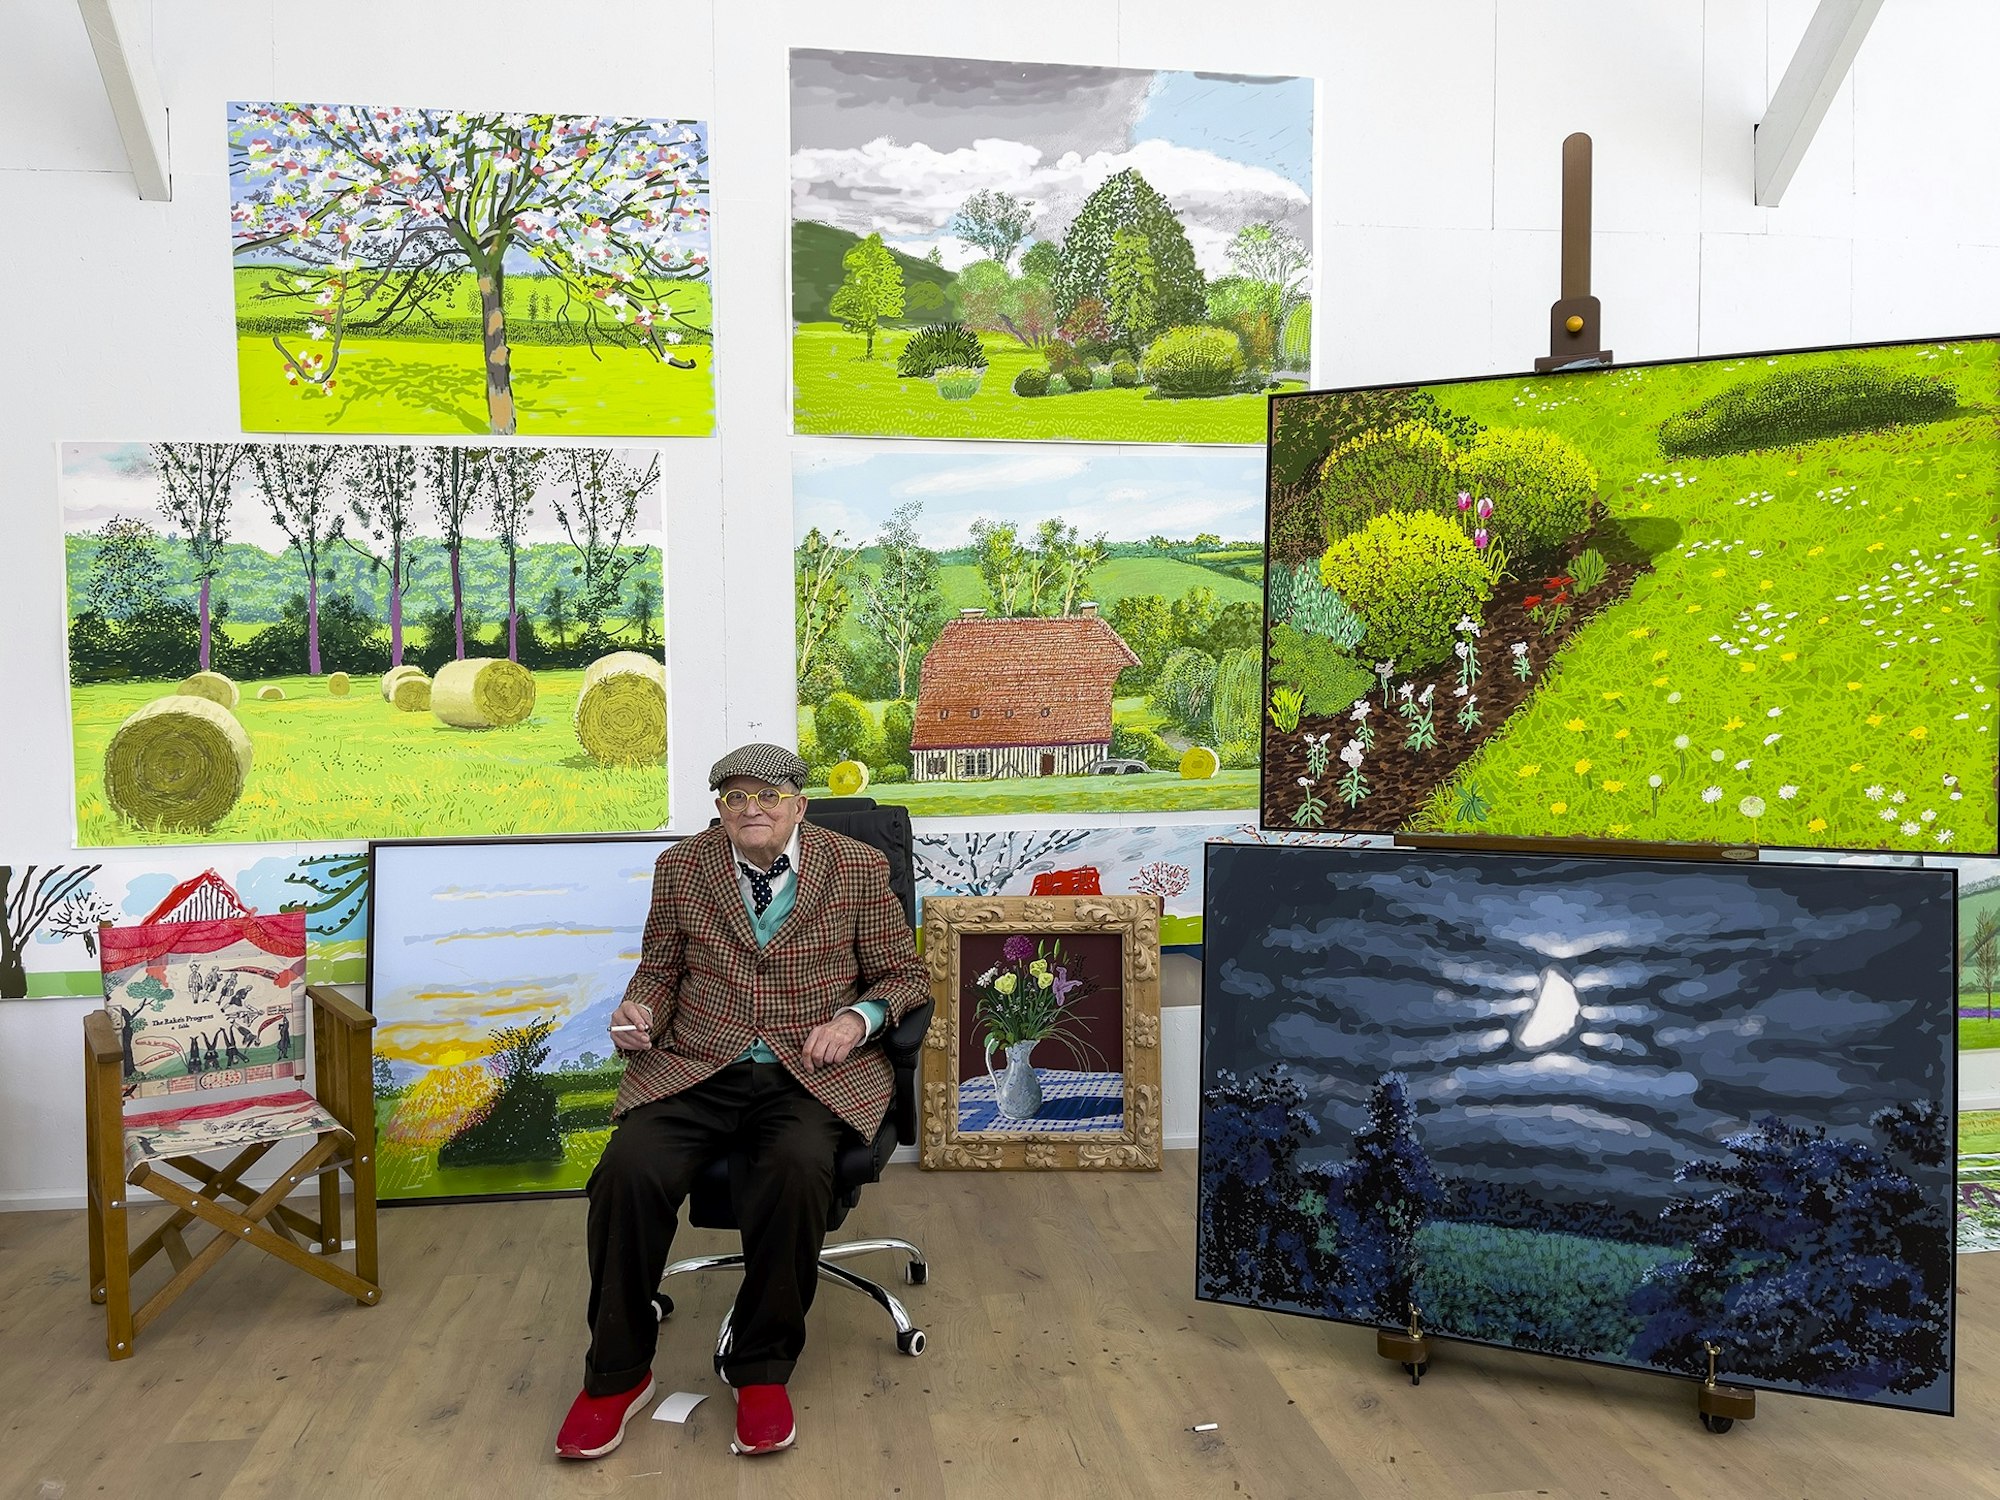 10 Things to Know about David Hockney’s The Arrival of Spring, Normandy